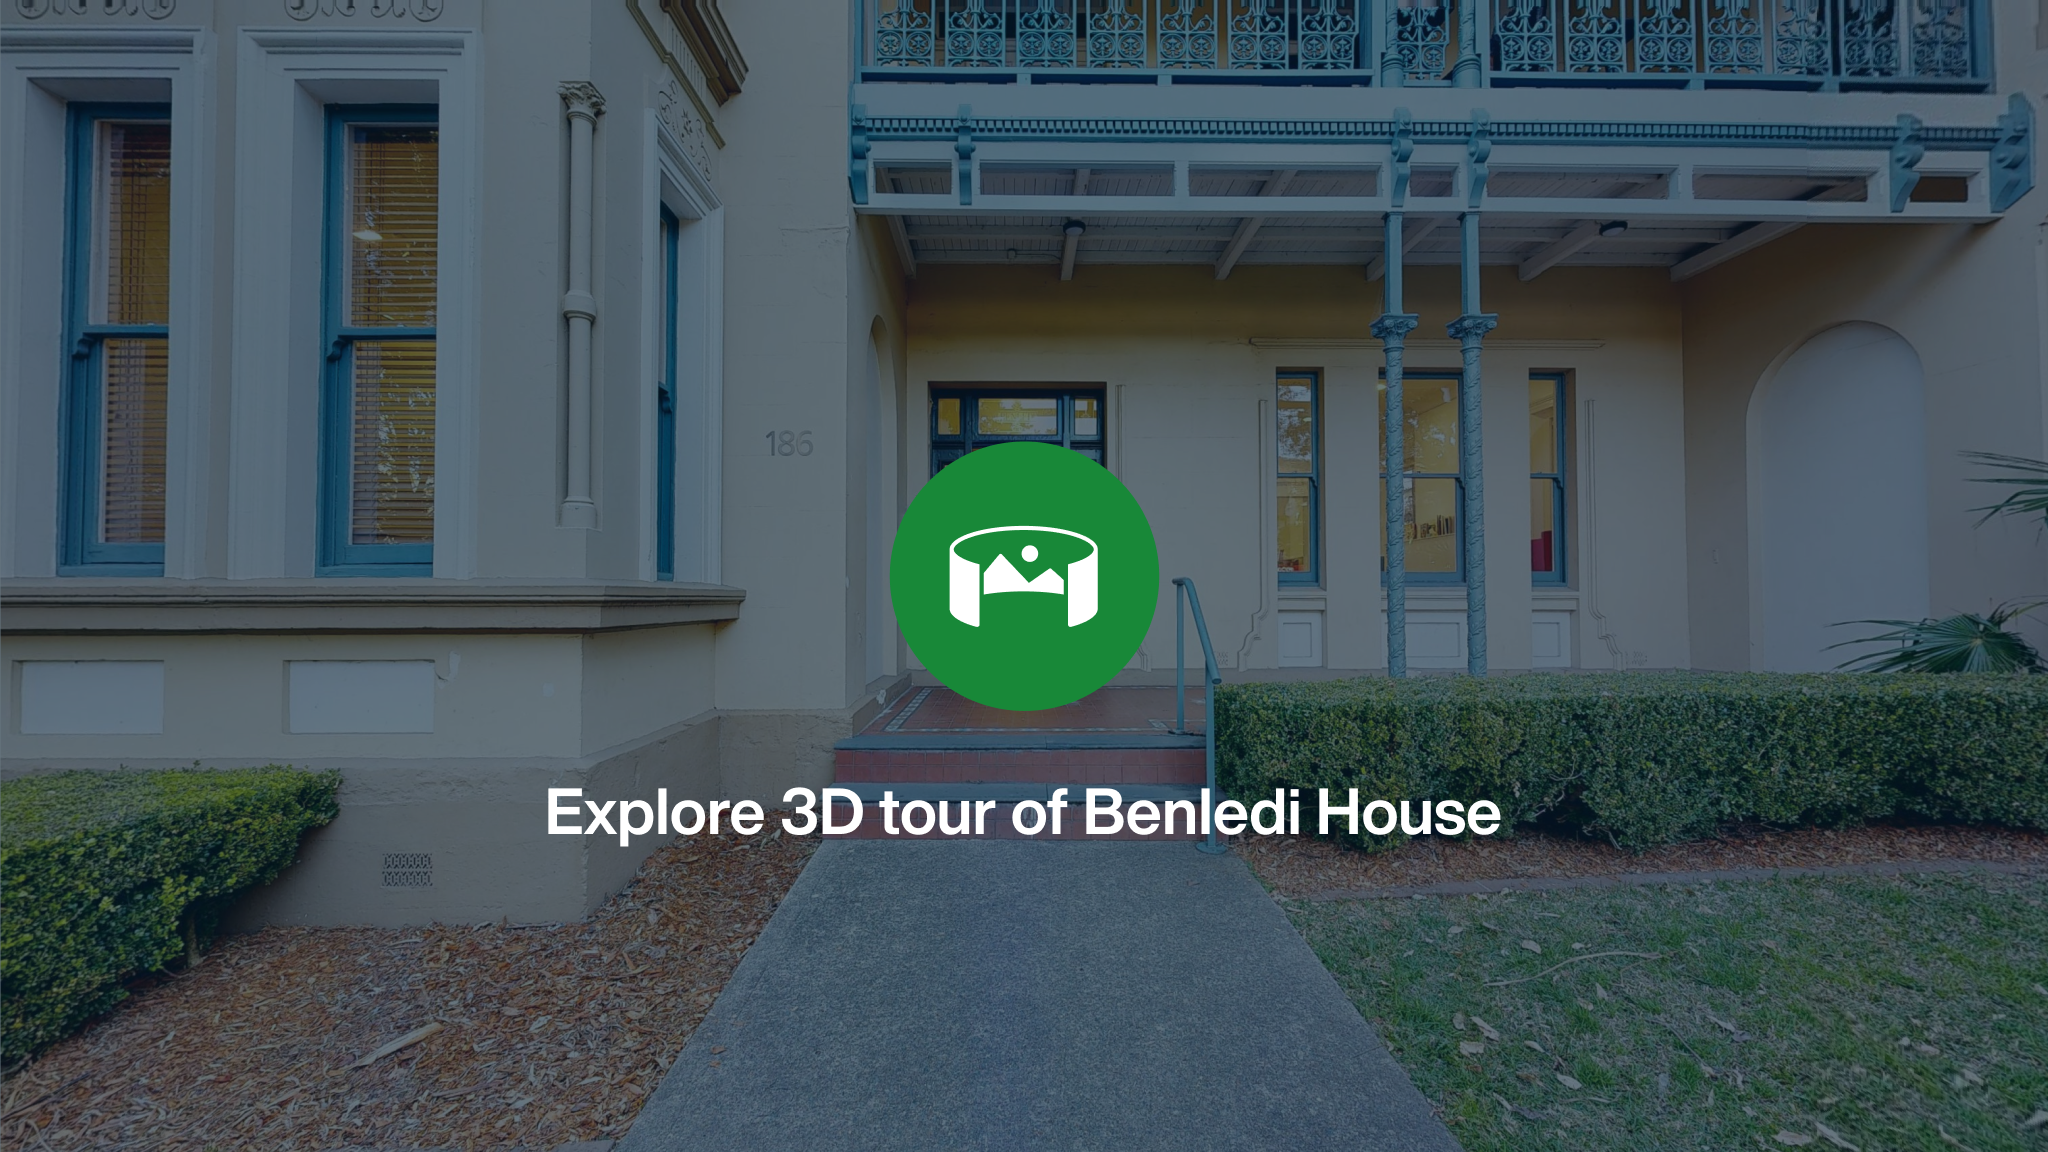 The front entrance to Benledi House overlayed with a green icon and the words Explore 3D tour of Benledi House.